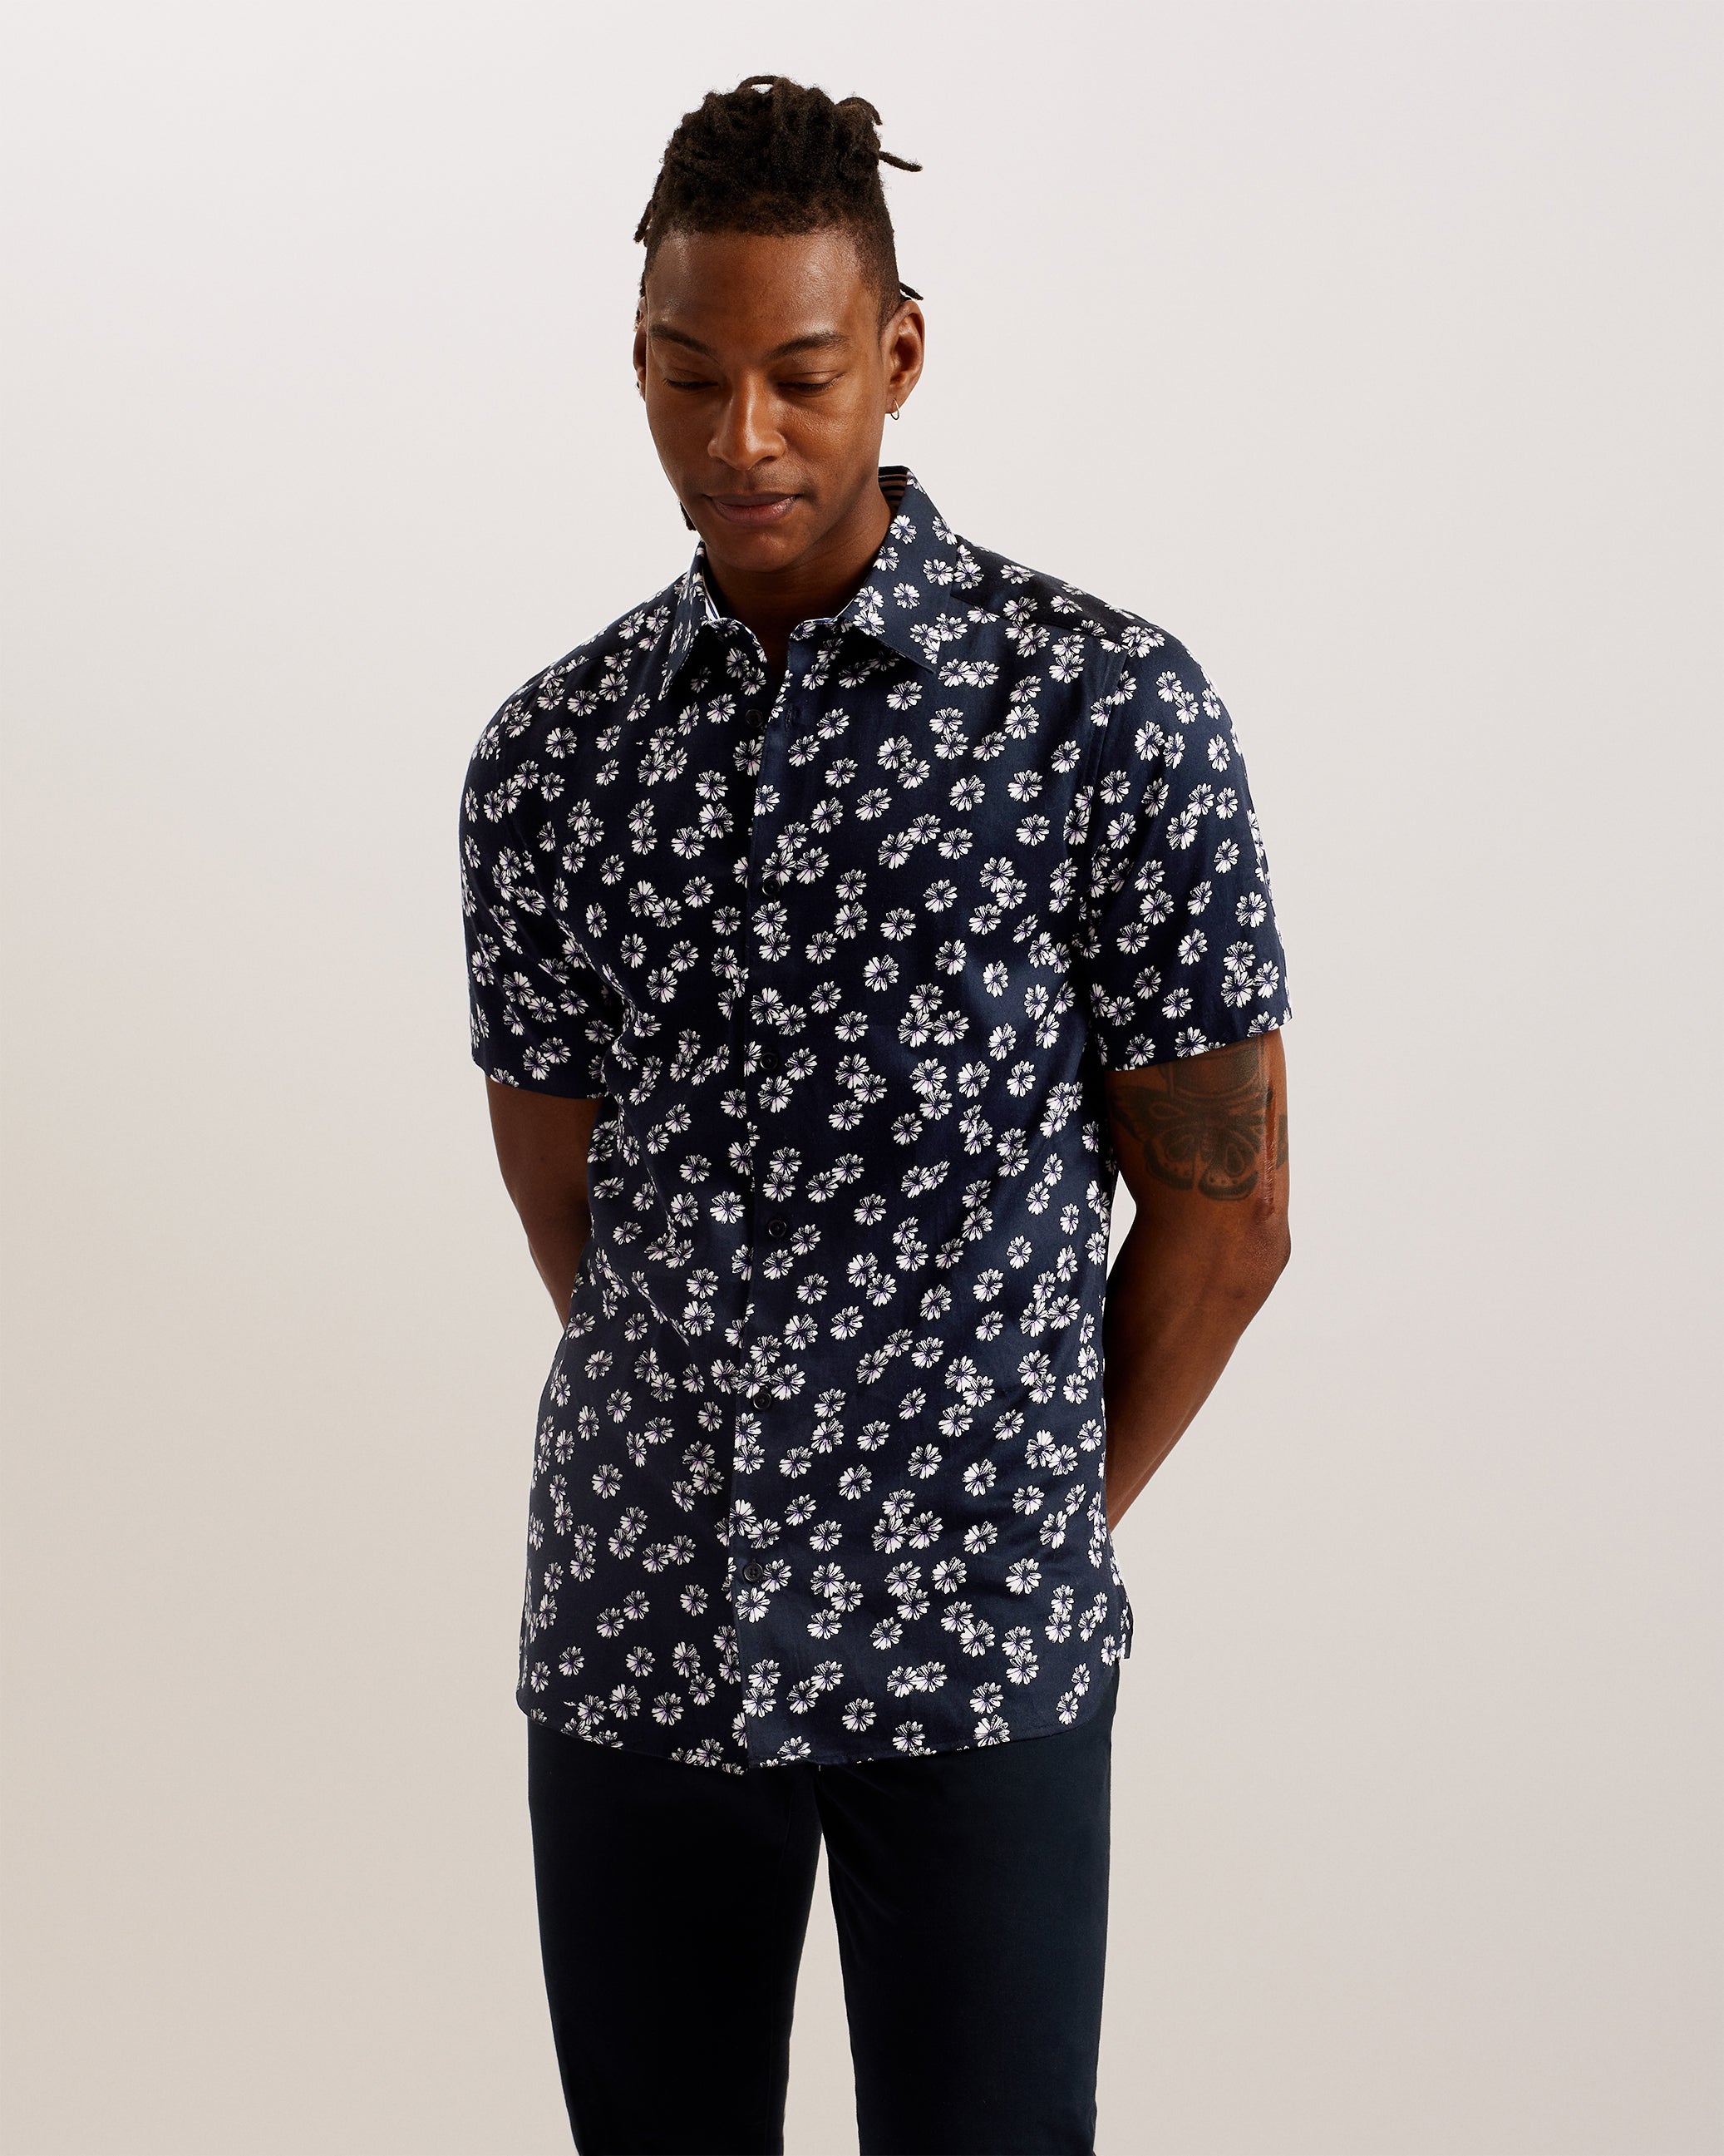 Men's New Arrivals Clothing – Ted Baker, Canada